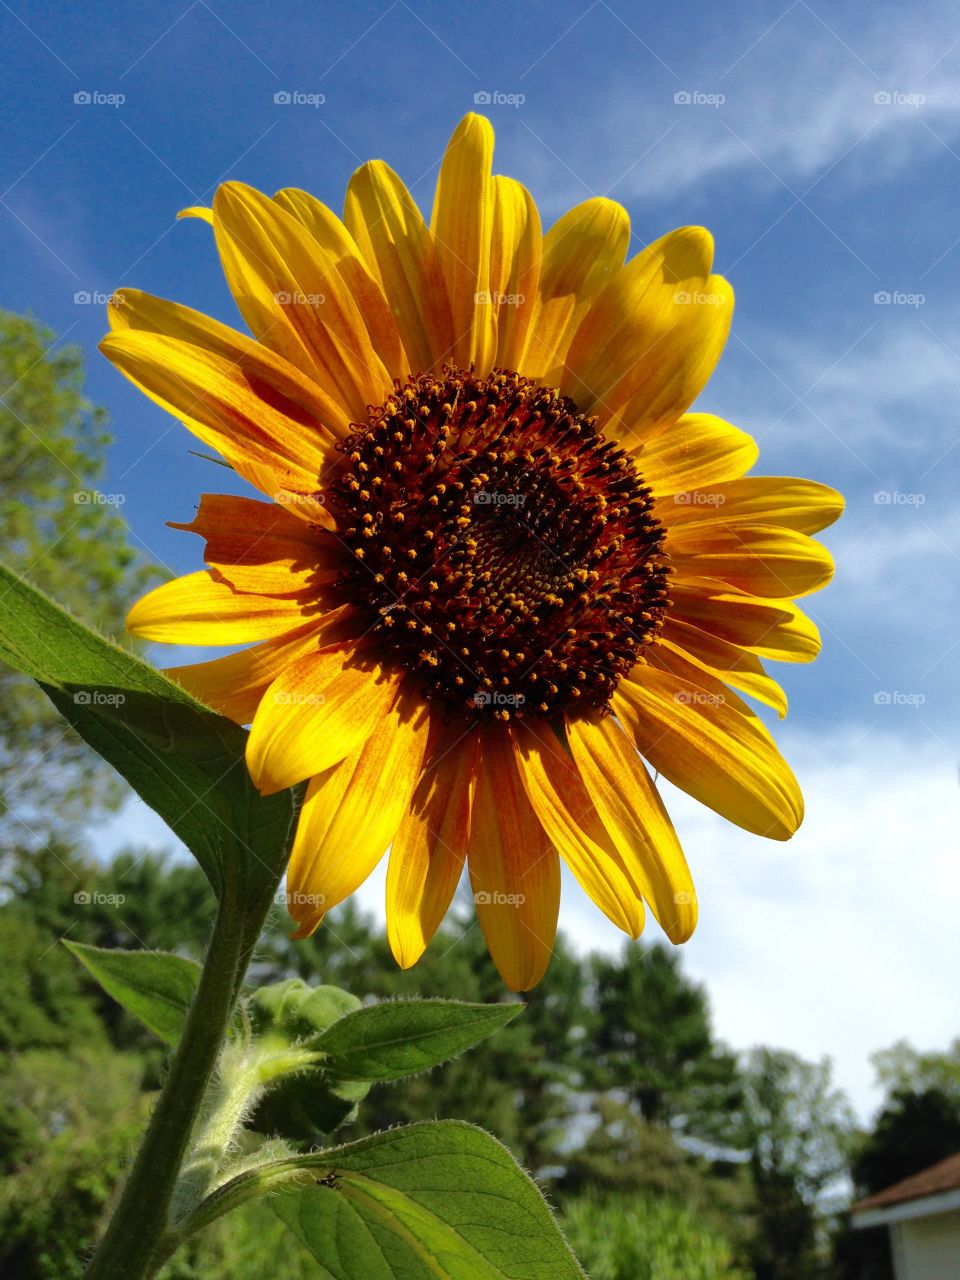 Sunflower Bloom in Late Afternoon Sun.🌻